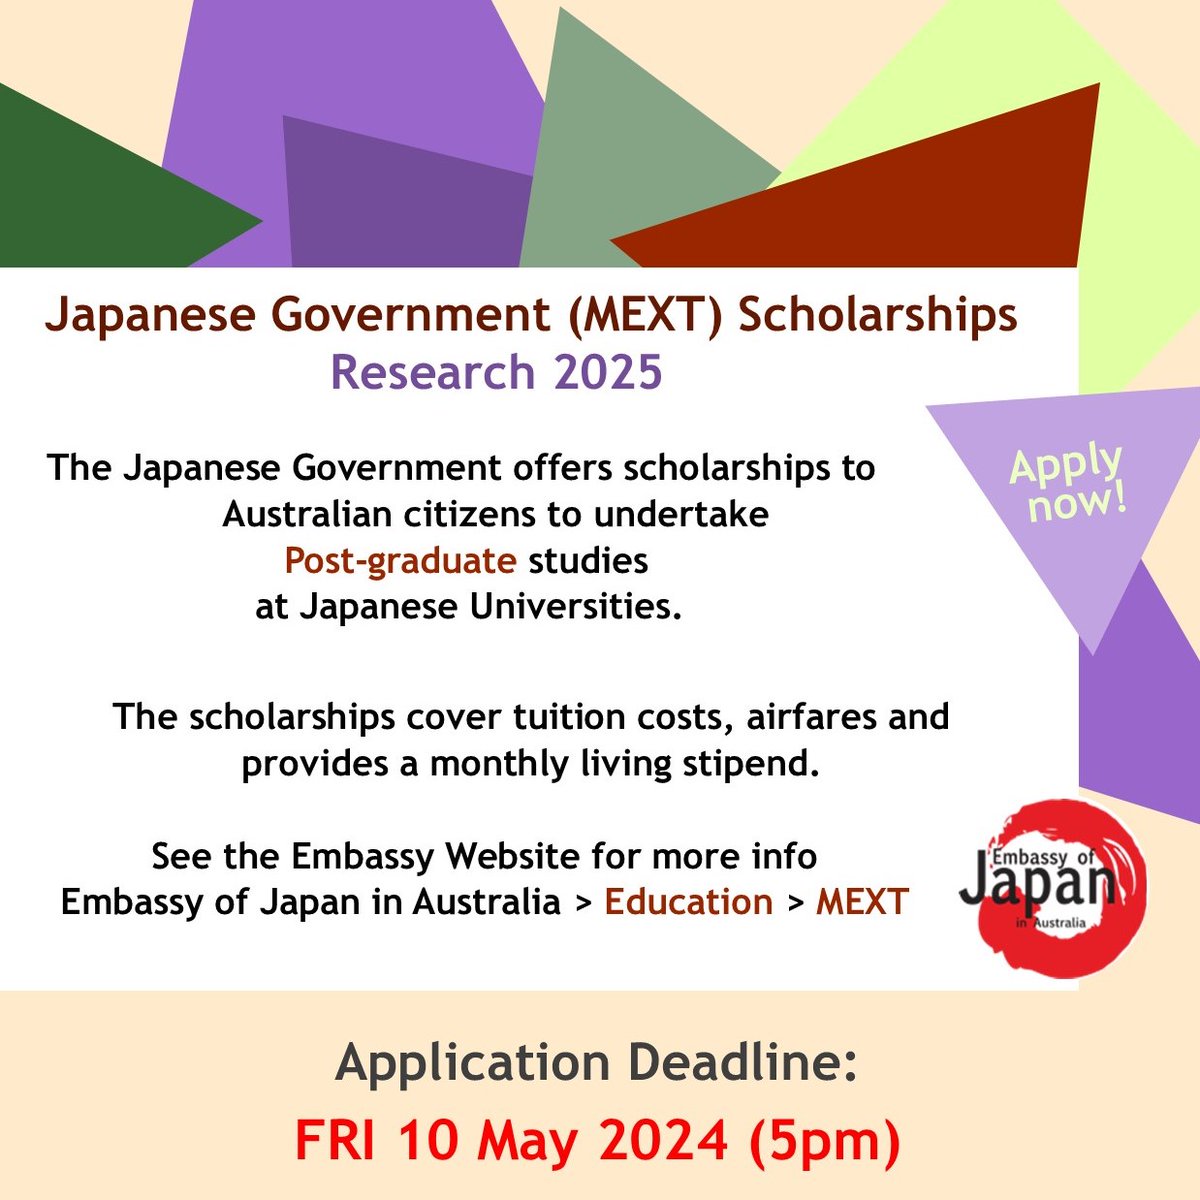 📣 Applications for the MEXT Scholarship Research Category are NOW OPEN! The Research Category is offered to Australian citizens looking to undergo graduate-level studies in Japan. Check out the Embassy of Japan homepage for full application details: bit.ly/2ruAl6I